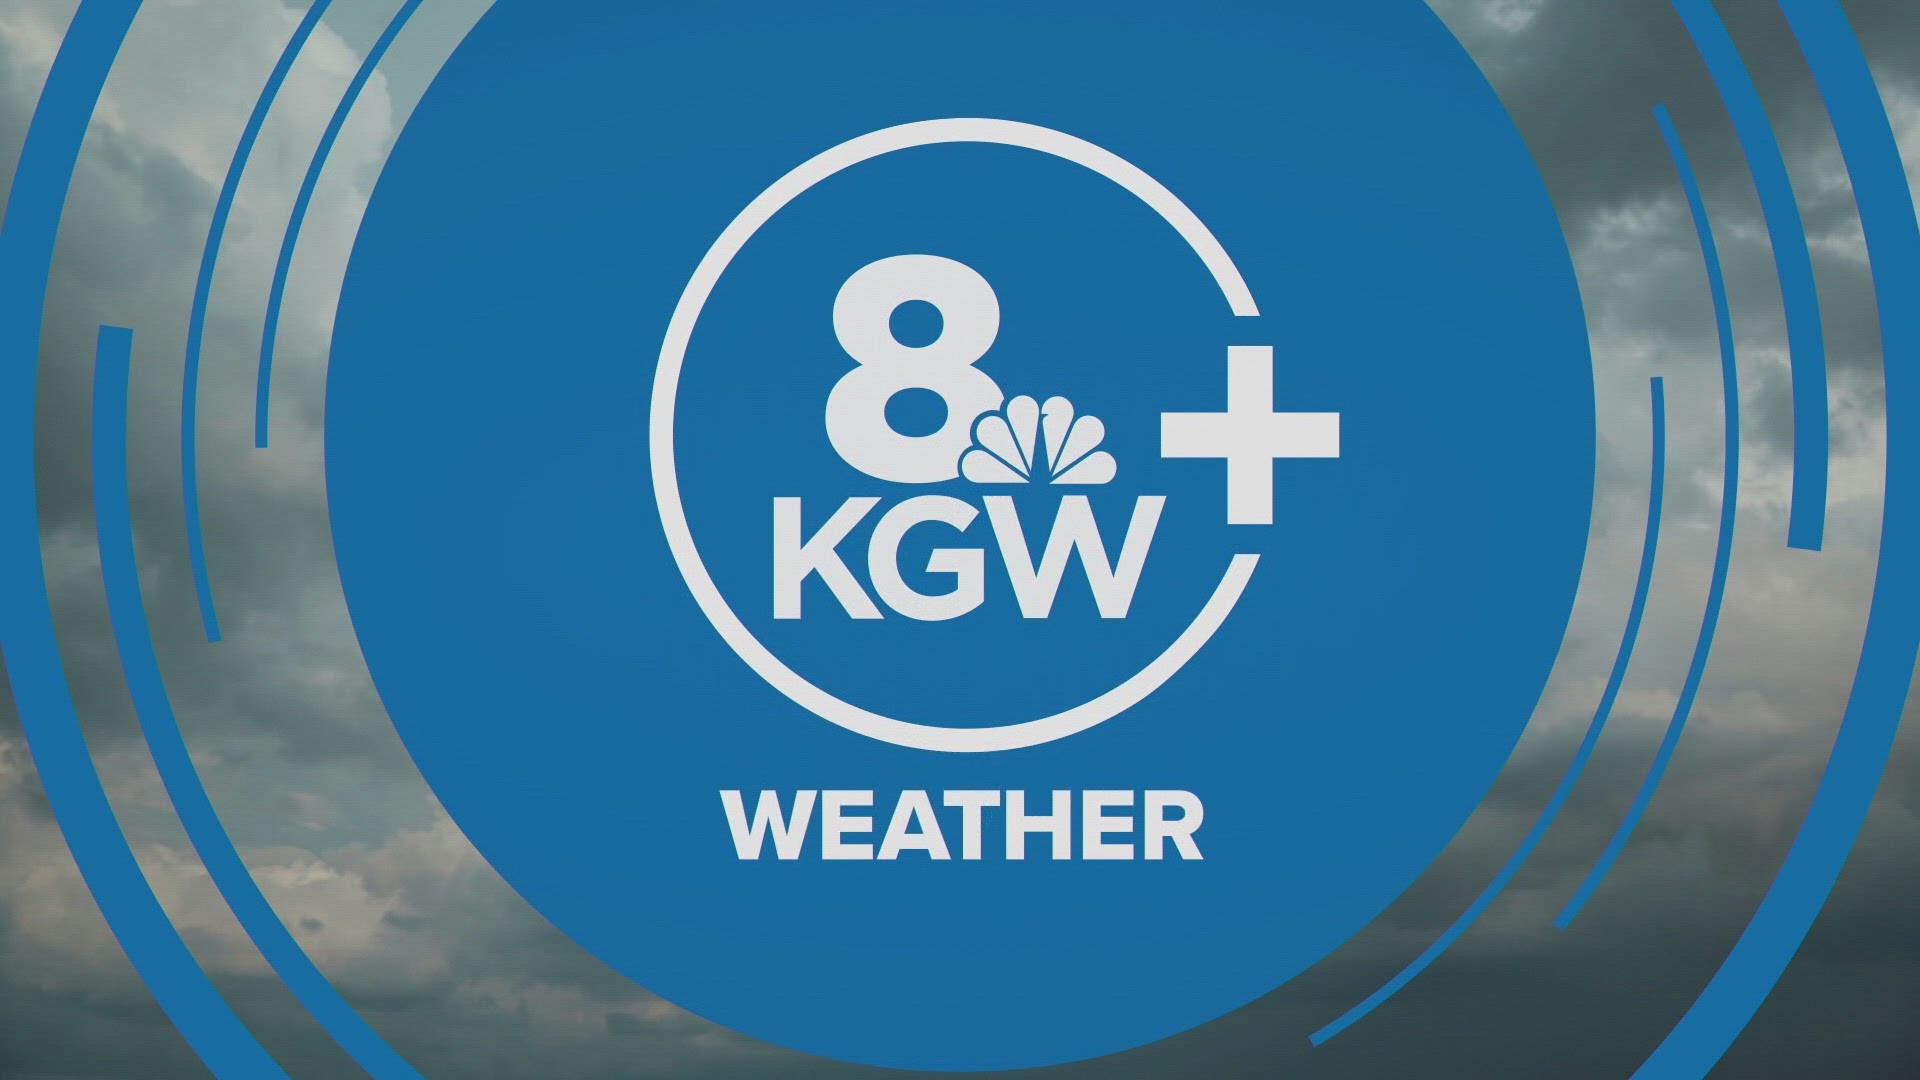 KGW Meteorologist Rod Hill with the KGW+ weather report for Portland and surrounding areas.